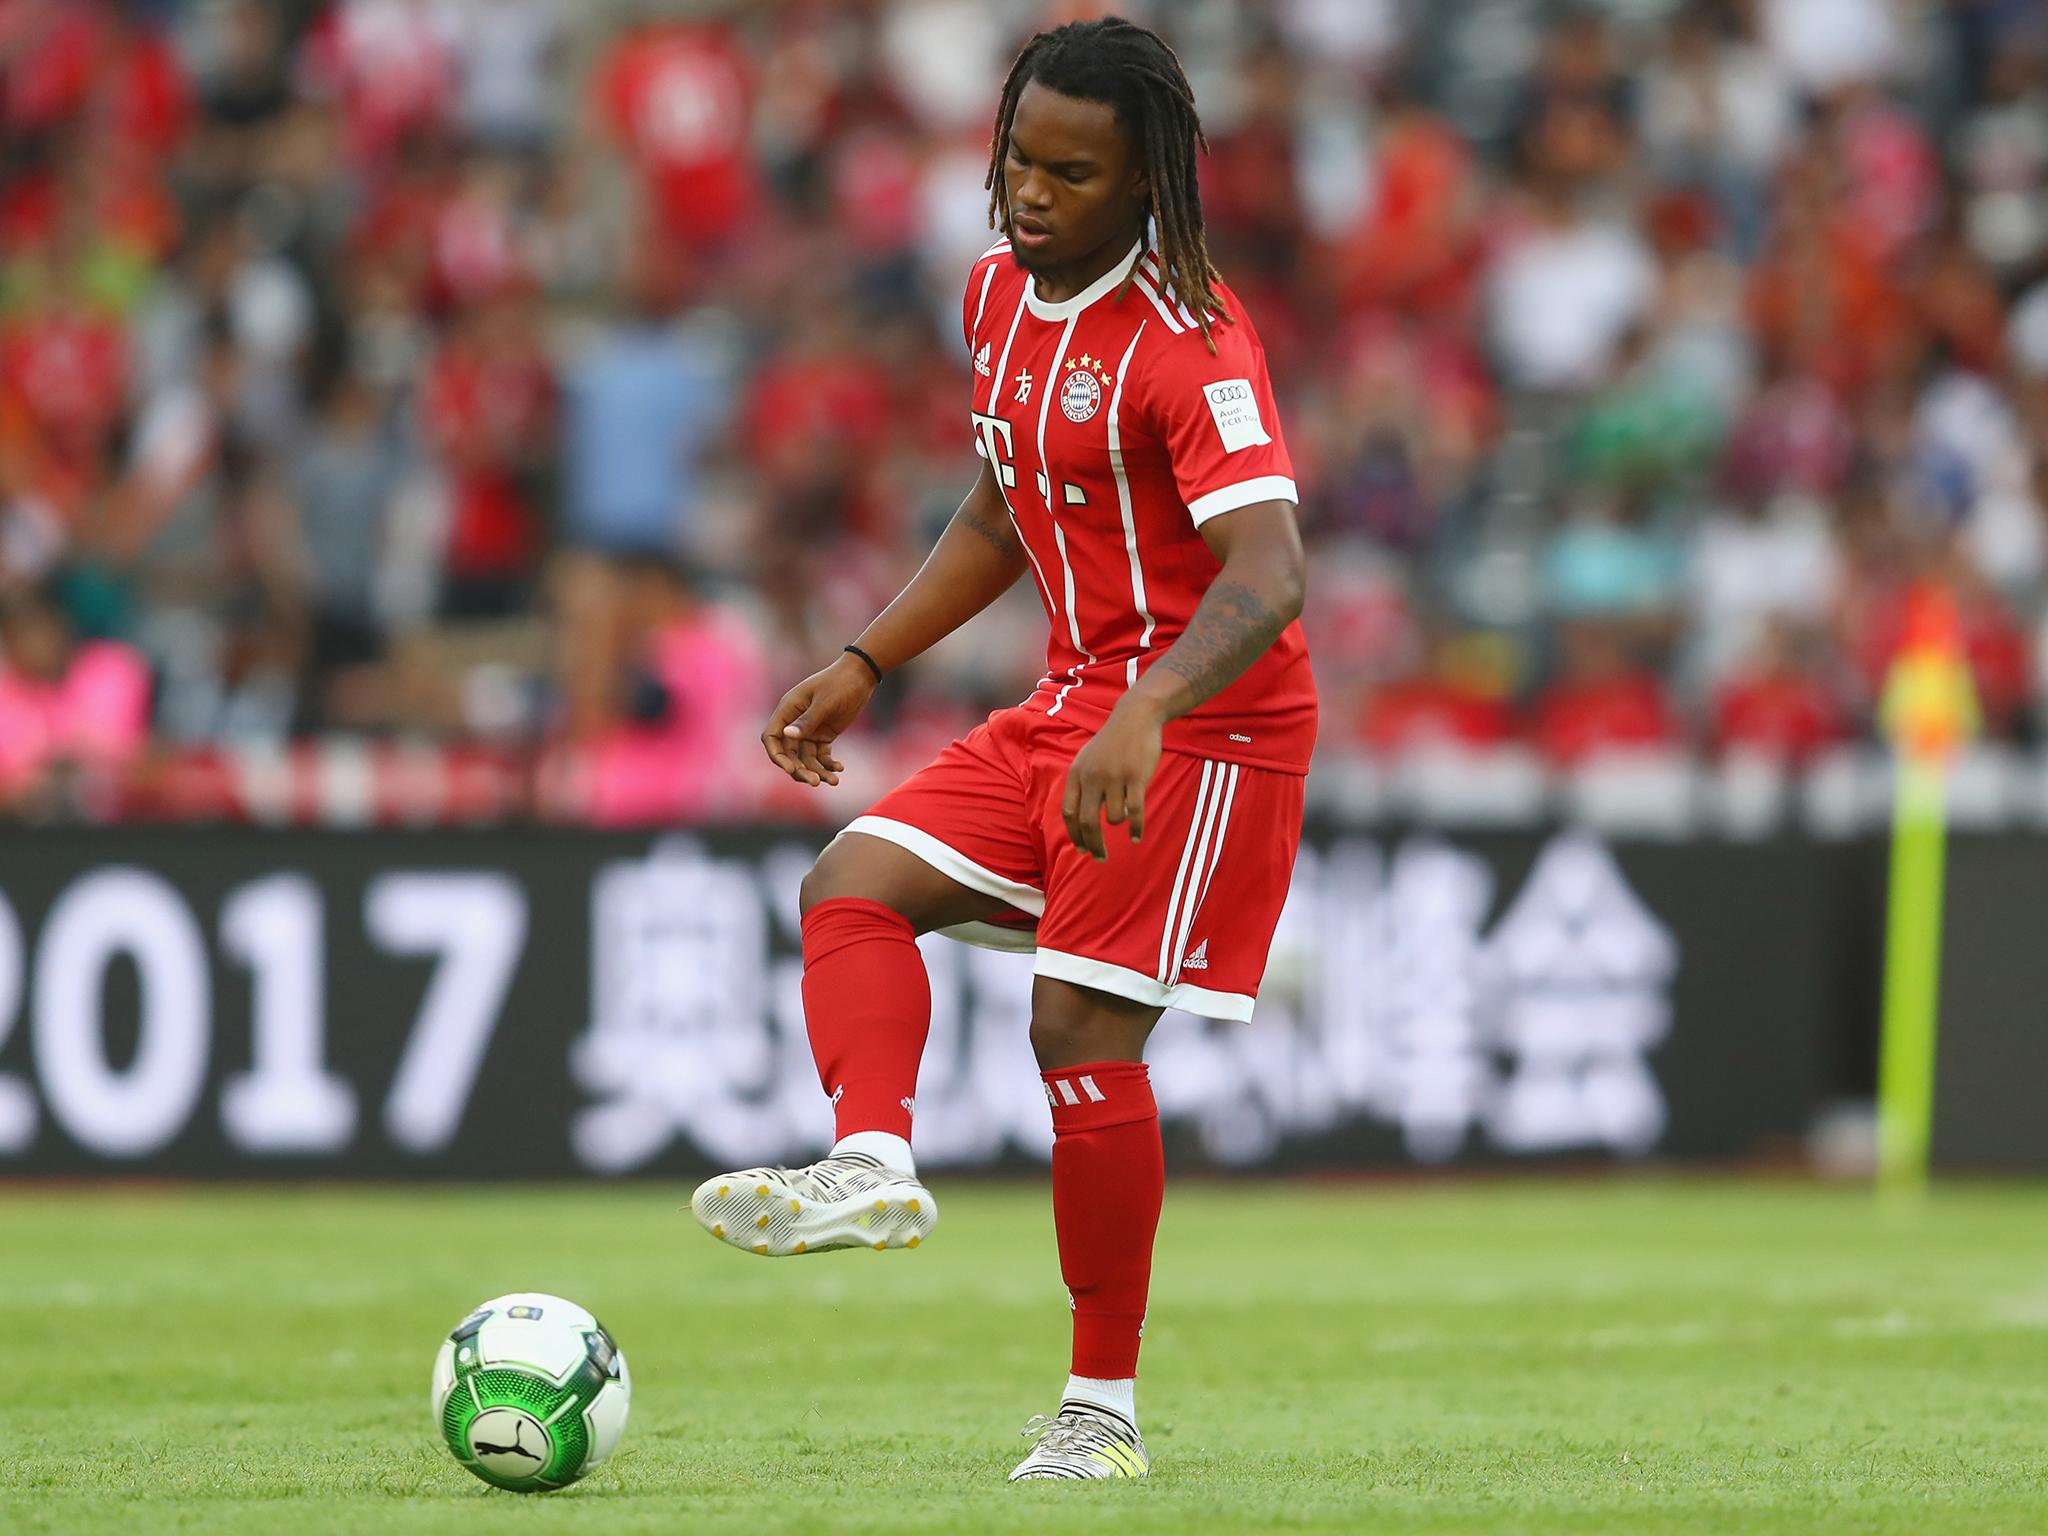 Sanches suffered a disappointing debut season at Bayern Munich